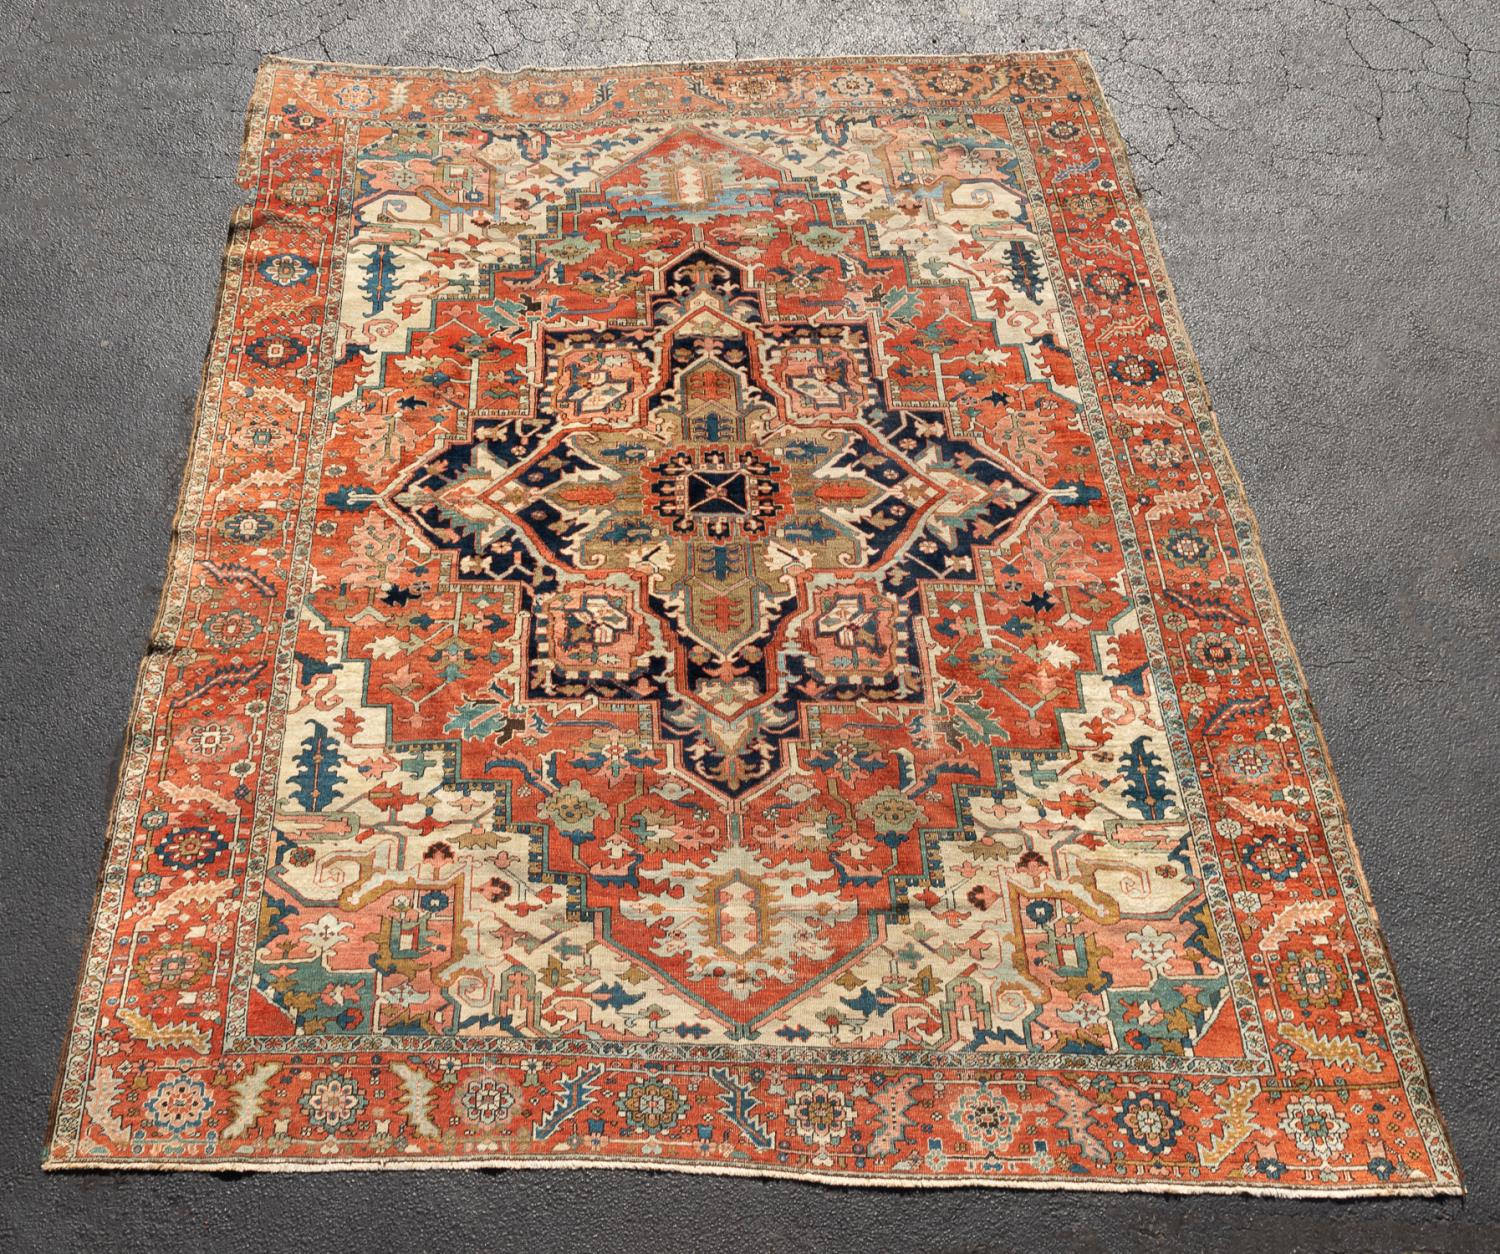 CA 1900 HAND KNOTTED WOOL PERSIAN 3590d6